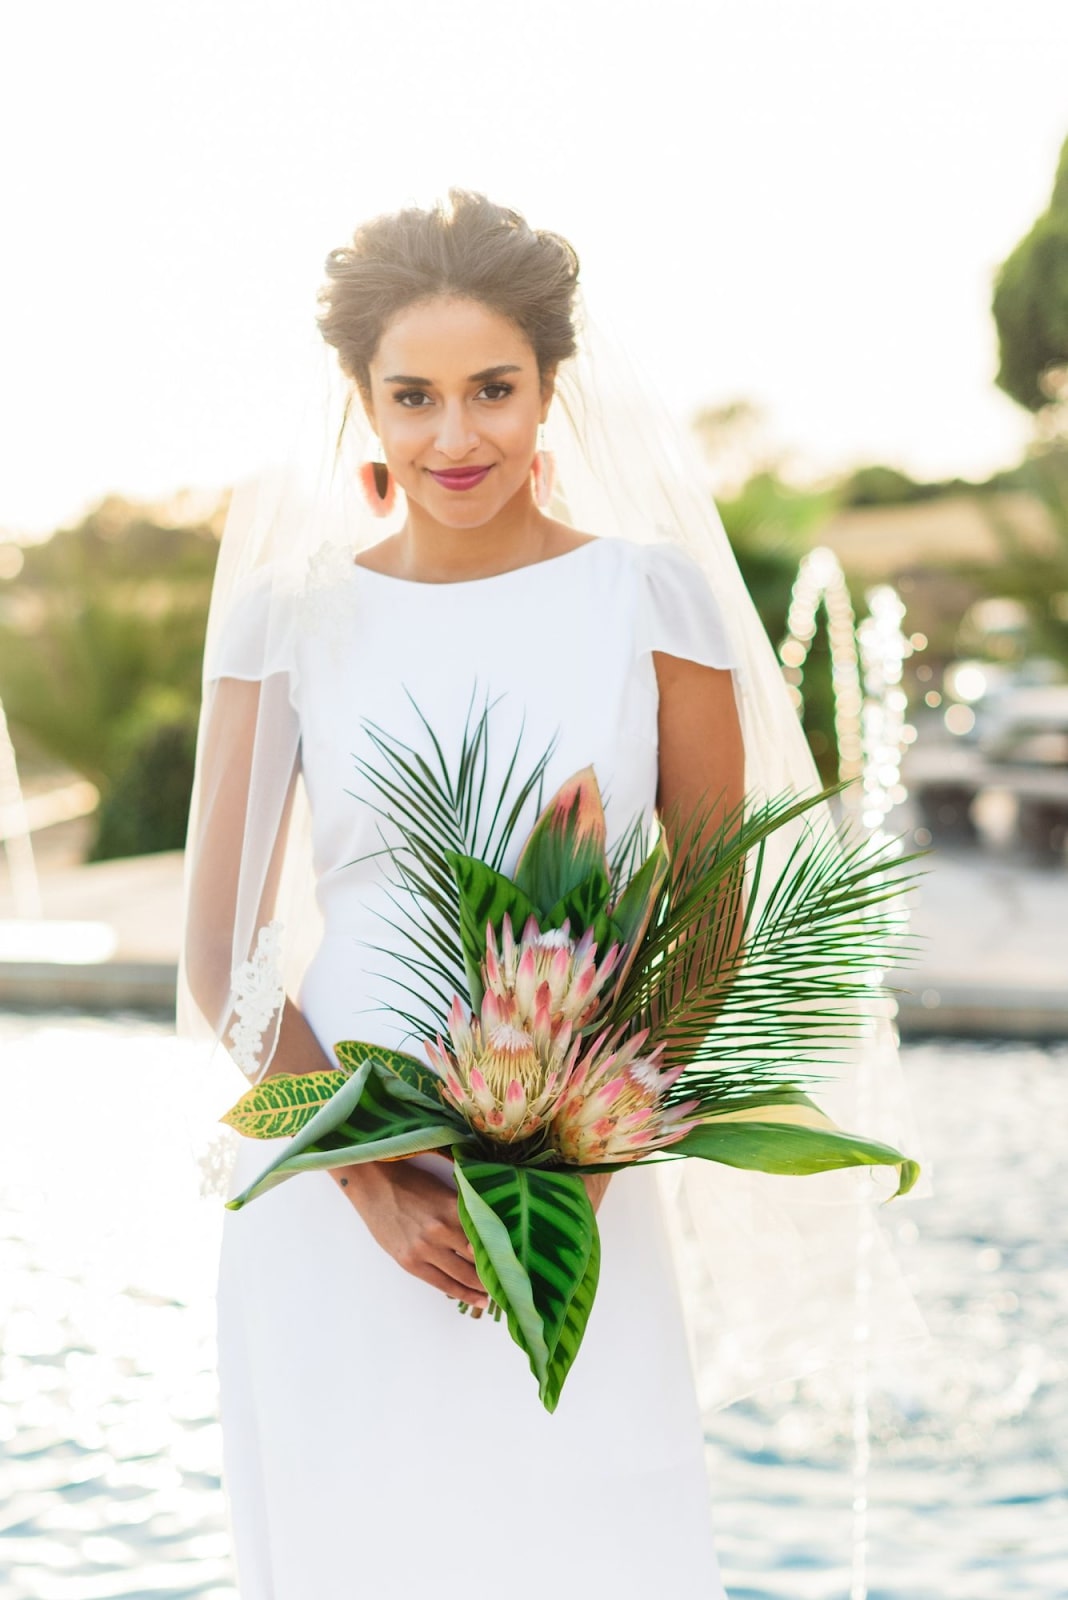 Obviously, it would be super ideal to have your wedding on the beaches of Maui. But if that isn’t in the cards, try adding some island touches to your big day and having palm leaf fans instead of traditional bouquets.